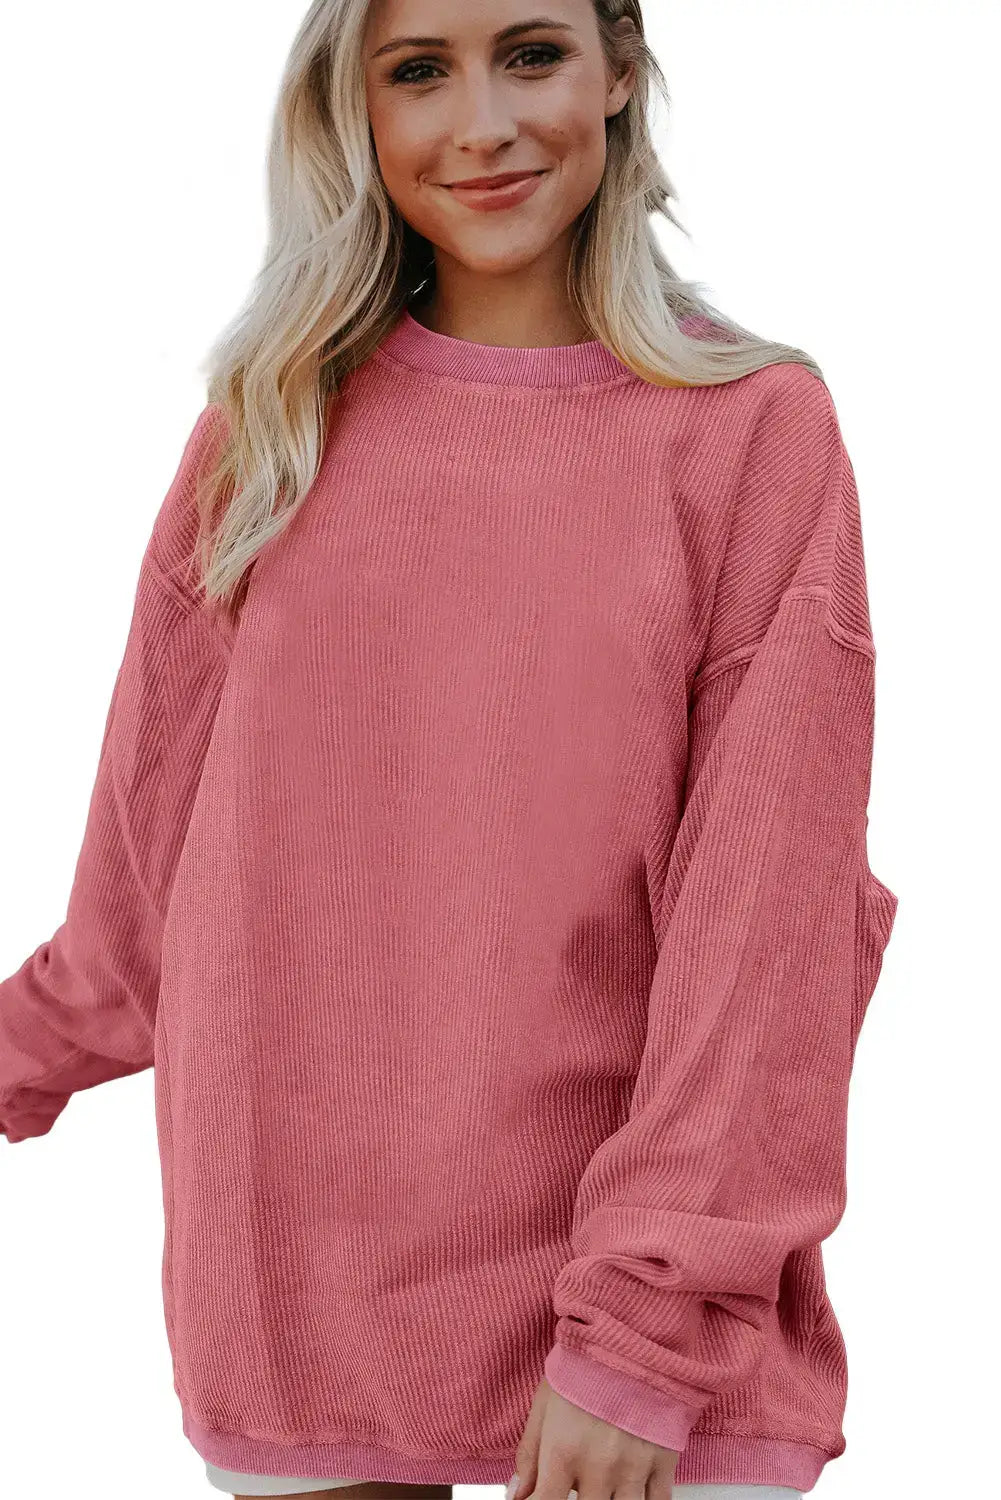 Strawberry pink merry christmas corded pullover sweatshirt - graphic